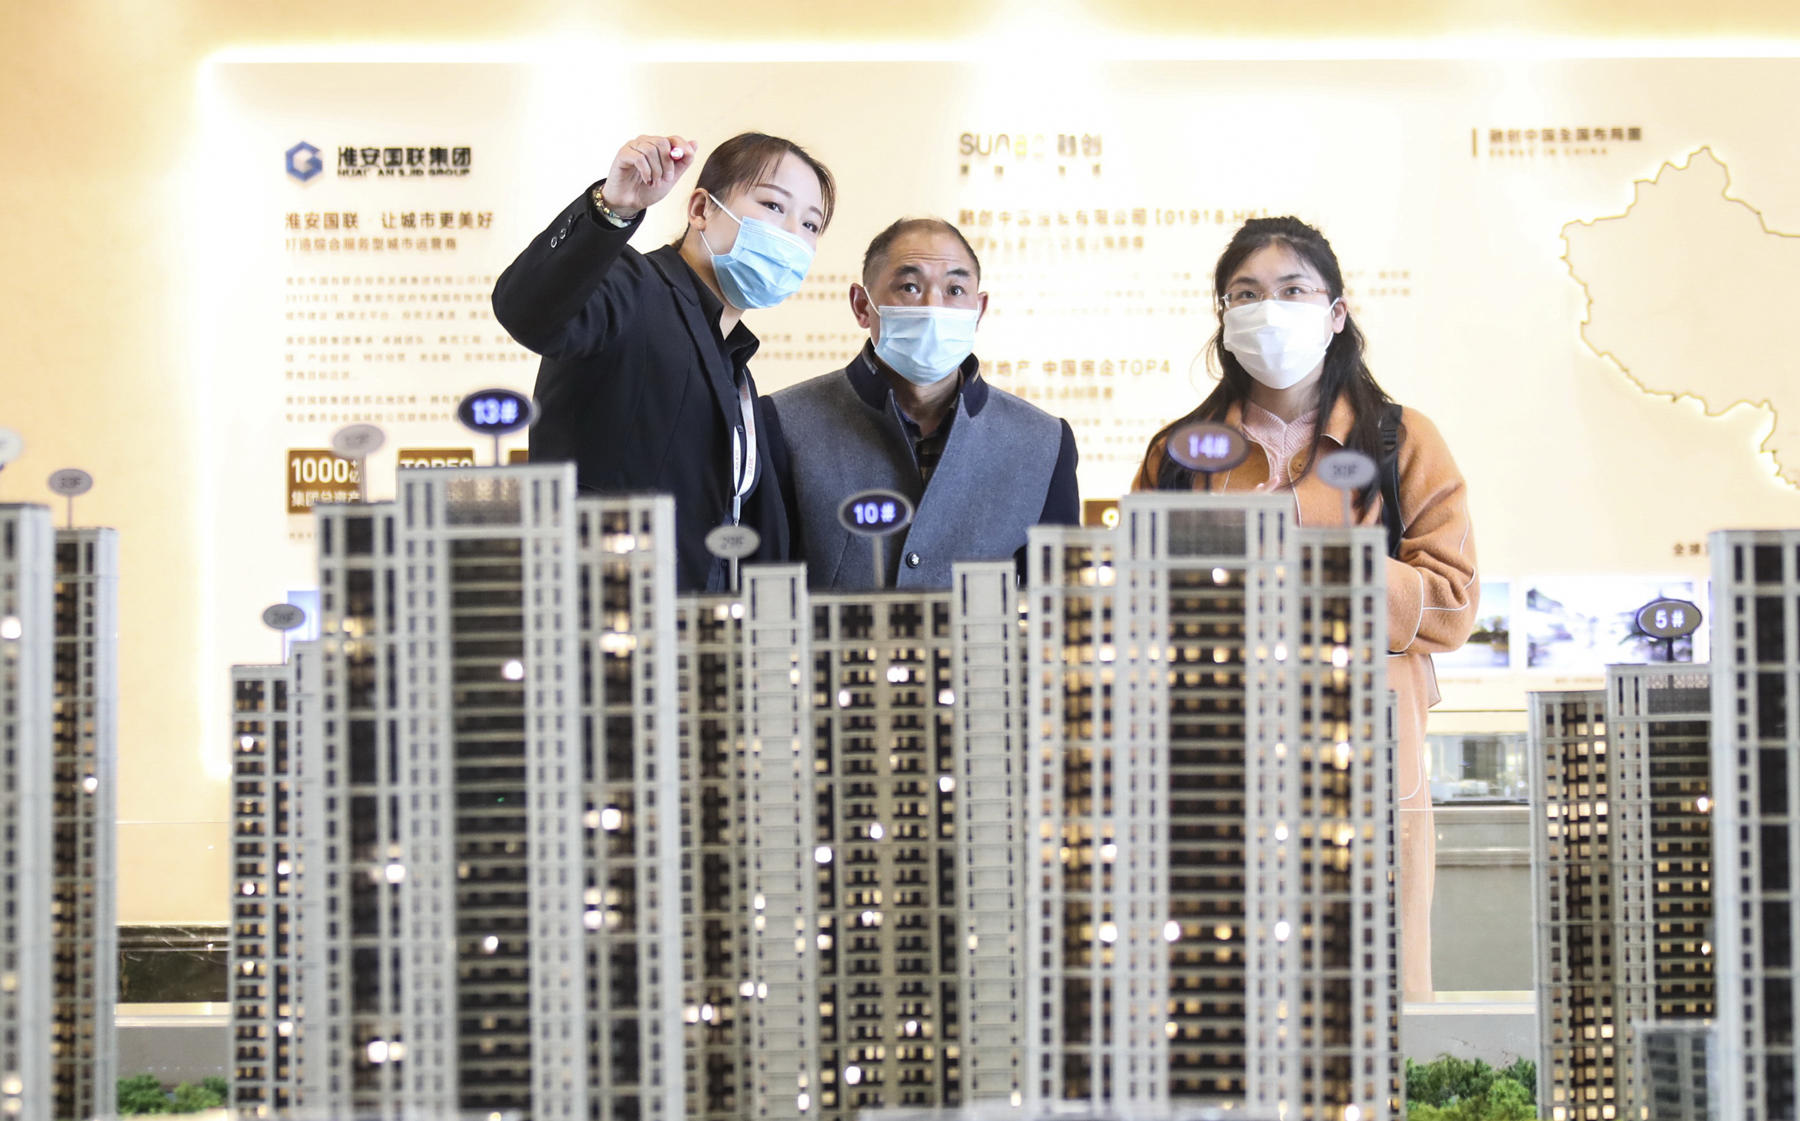 A recent CBRE survey shows that in the wake of coronavirus, office tenants in China are more optimistic than those elsewhere in the Asia Pacific. (Credit: Costfoto/Barcroft Media via Getty Images)